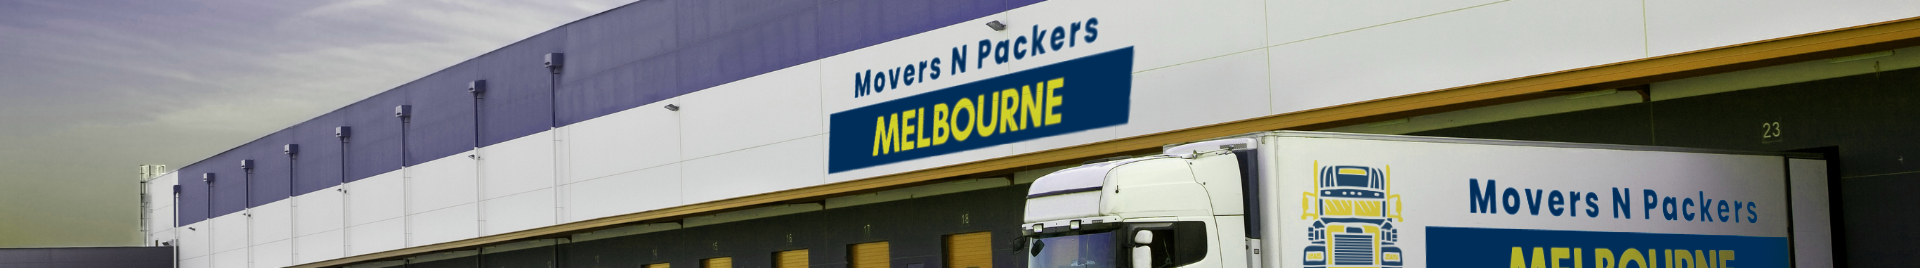 Movers N Packers Melbourne のプロファイルバナー